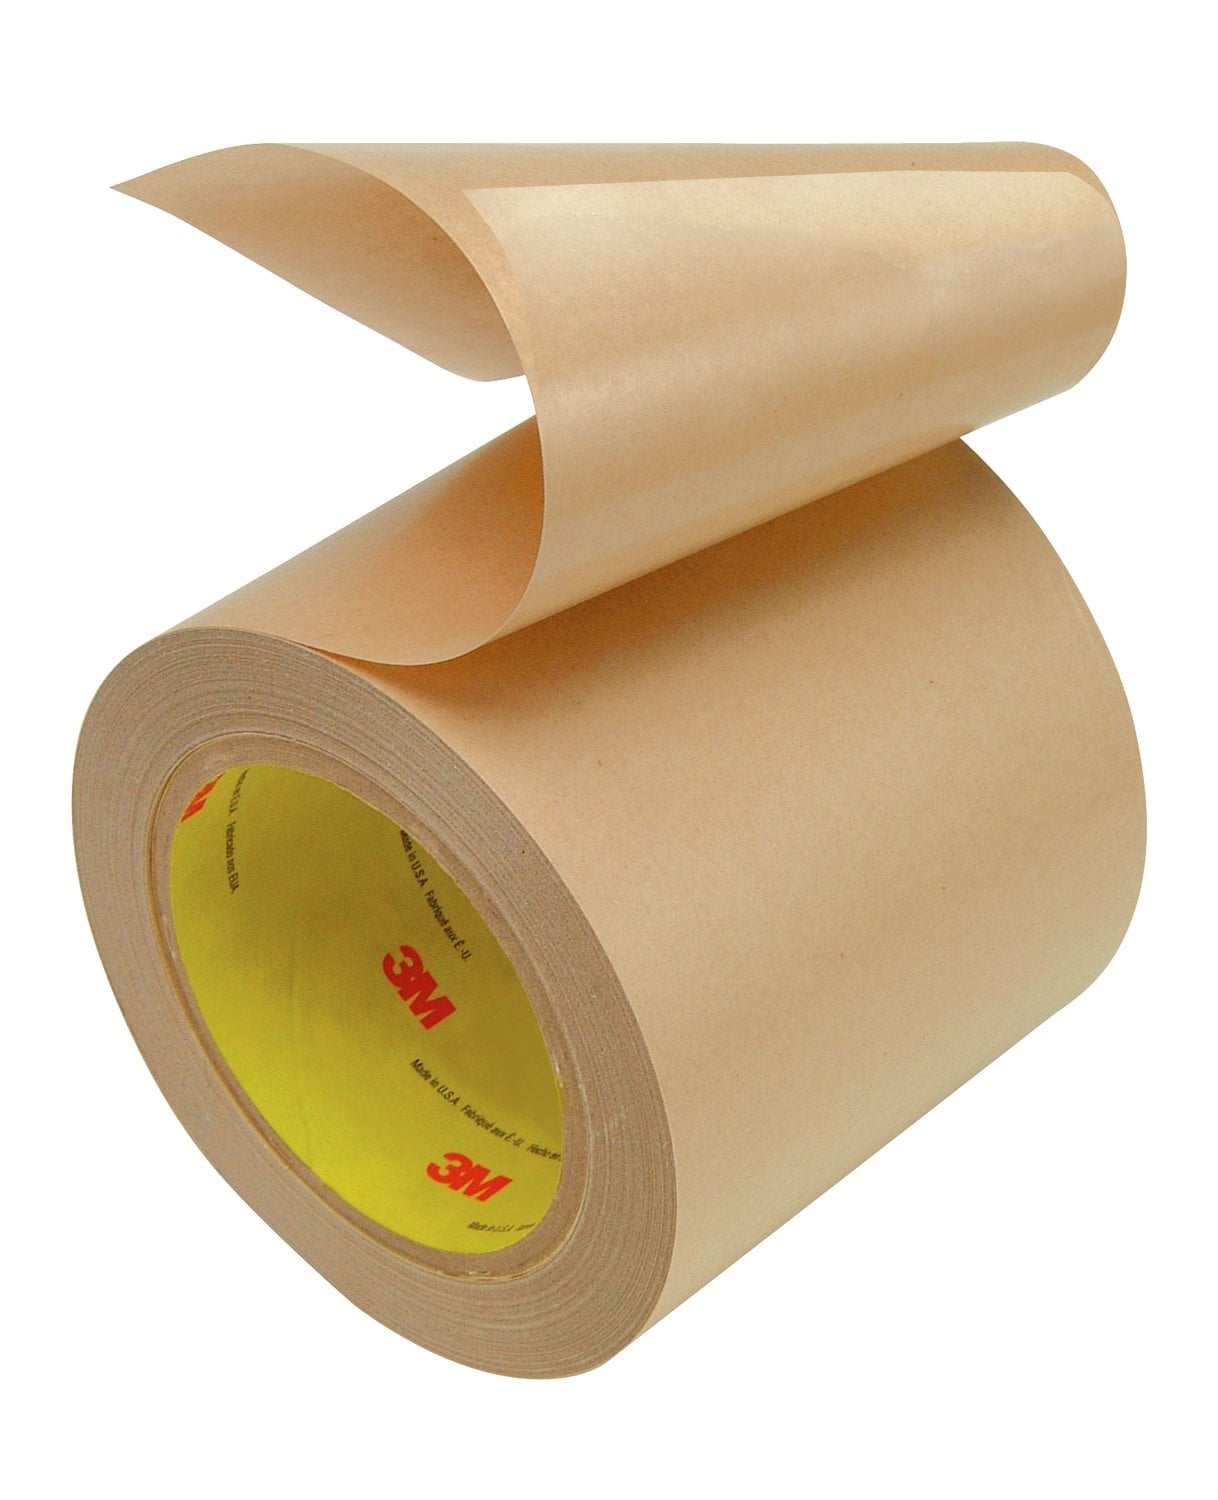 7000048555 - 3M Electrically Conductive Adhesive Transfer Tape 9703, 1 in x 36 yds,
9 rolls per case Bulk